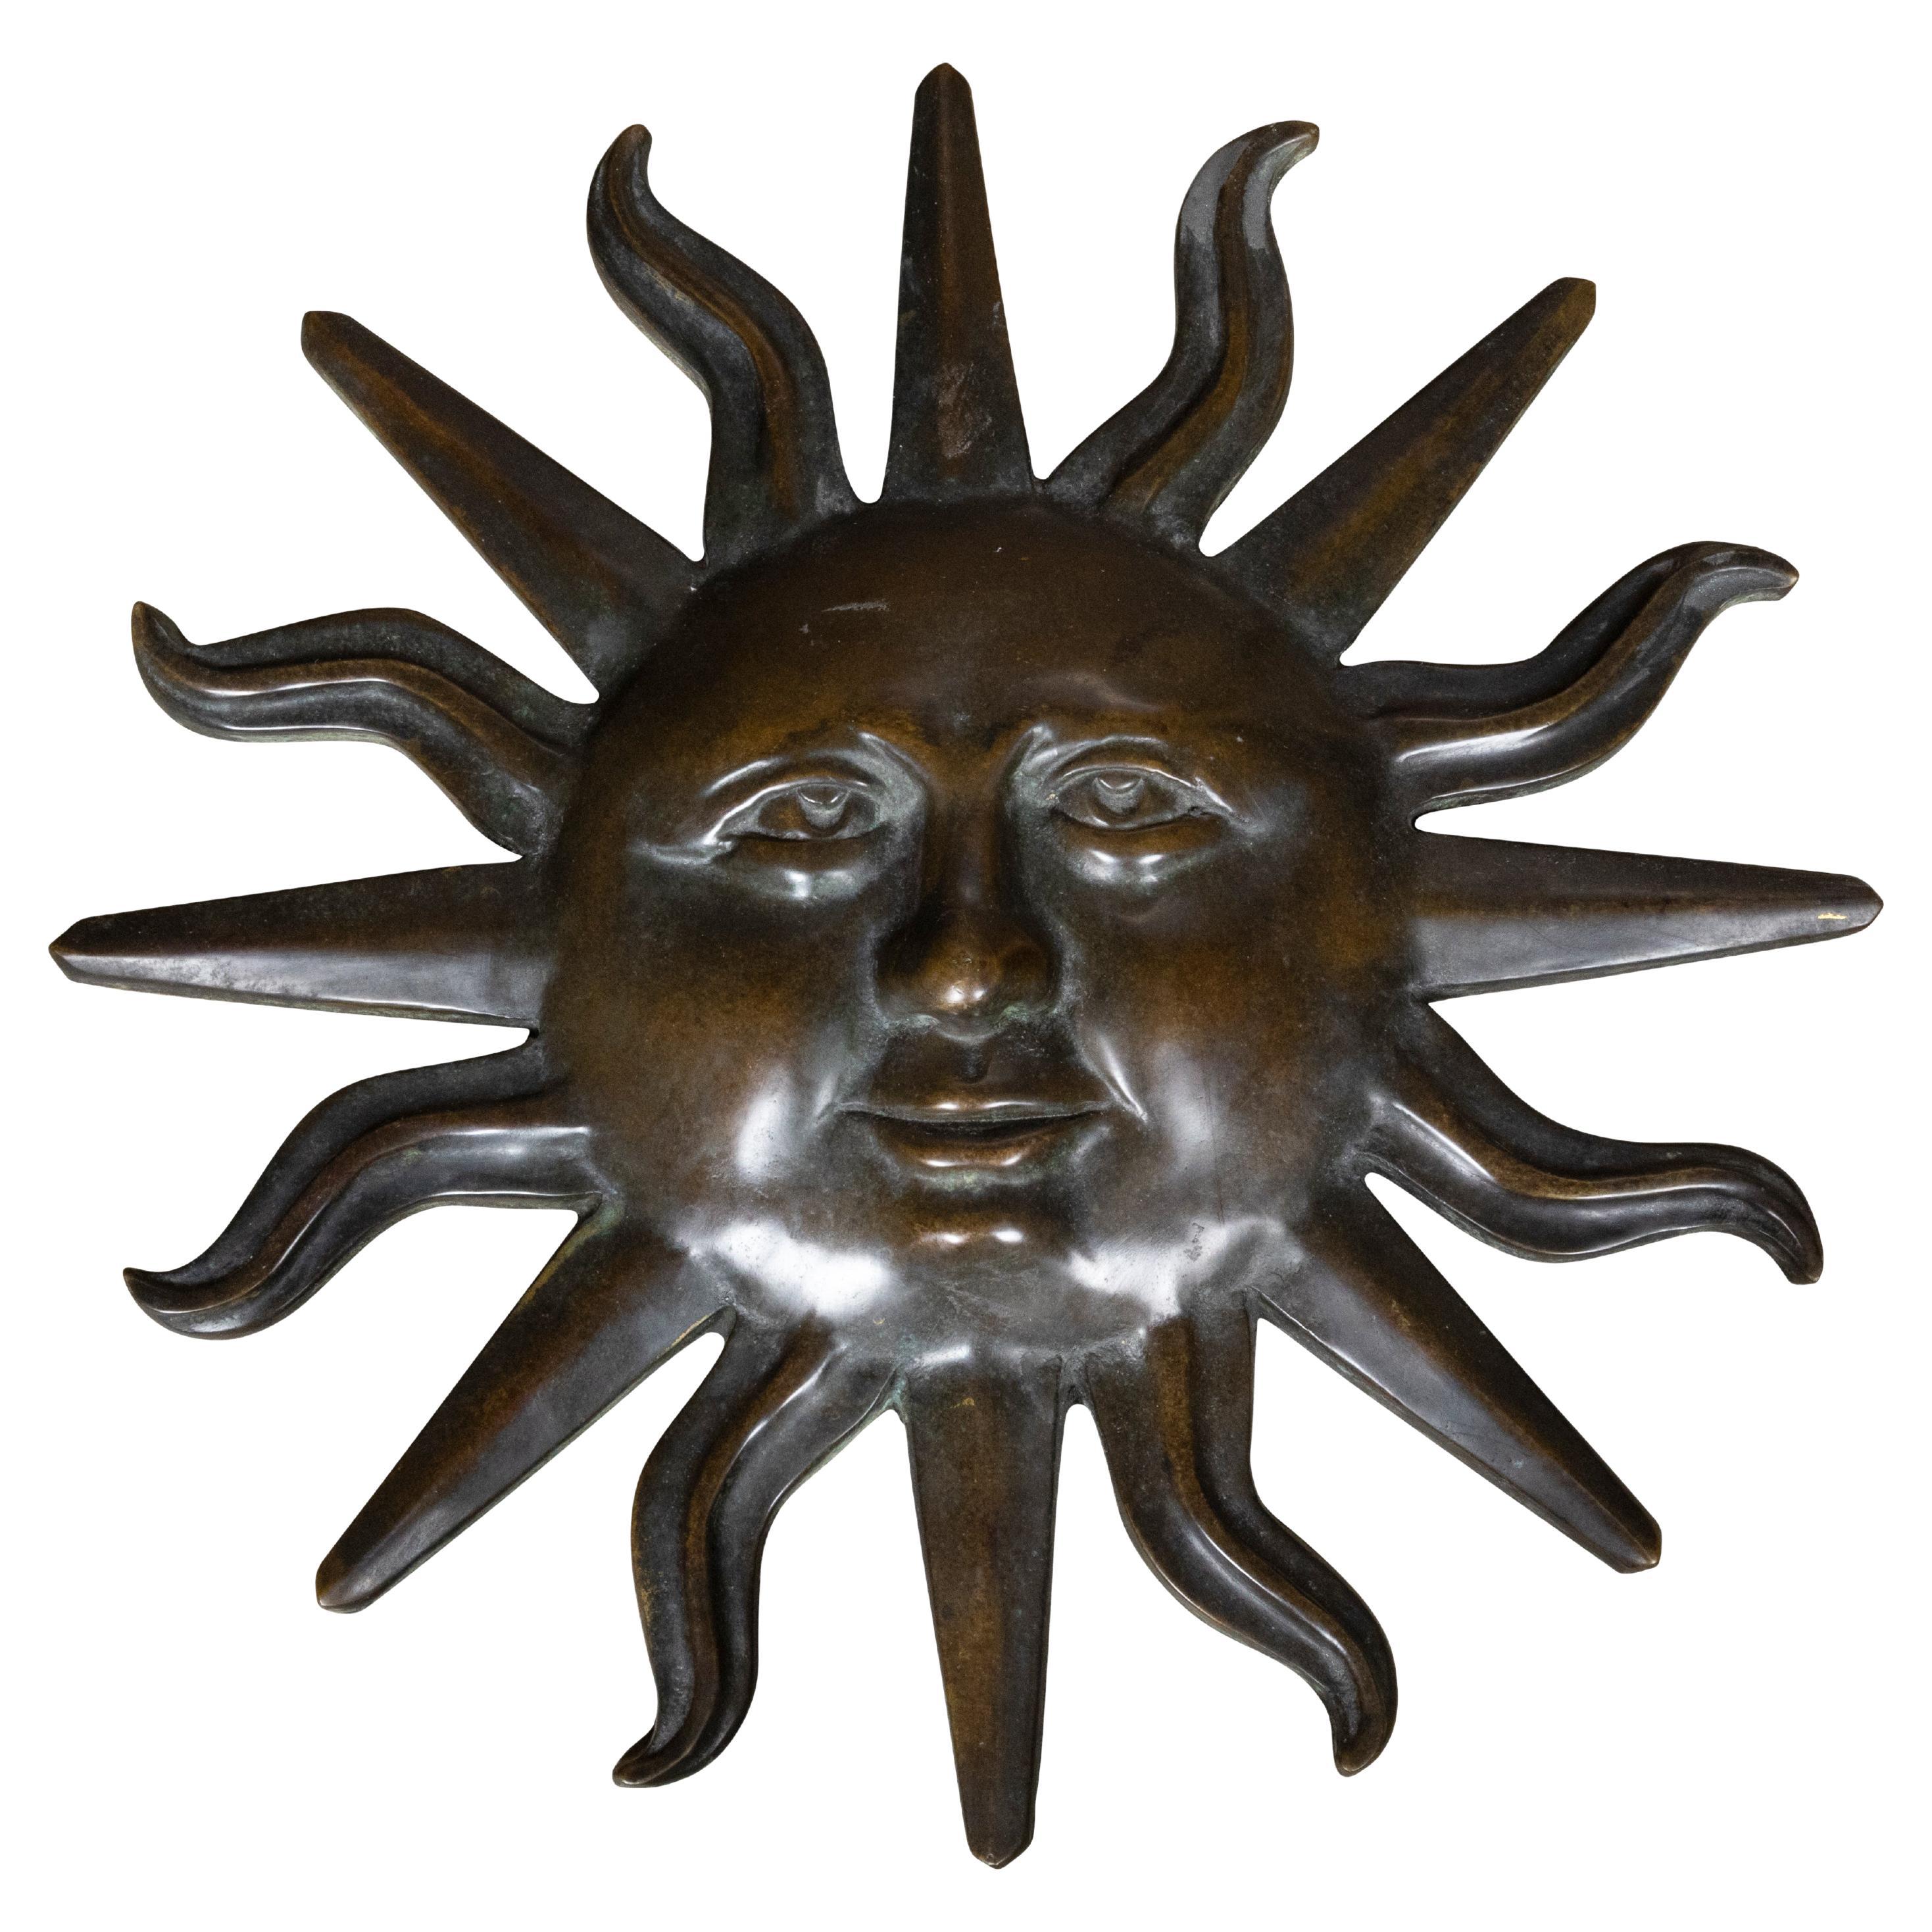 English 1920 Bronze Sun Ornament with Anthropomorphic Features and Dark Patina